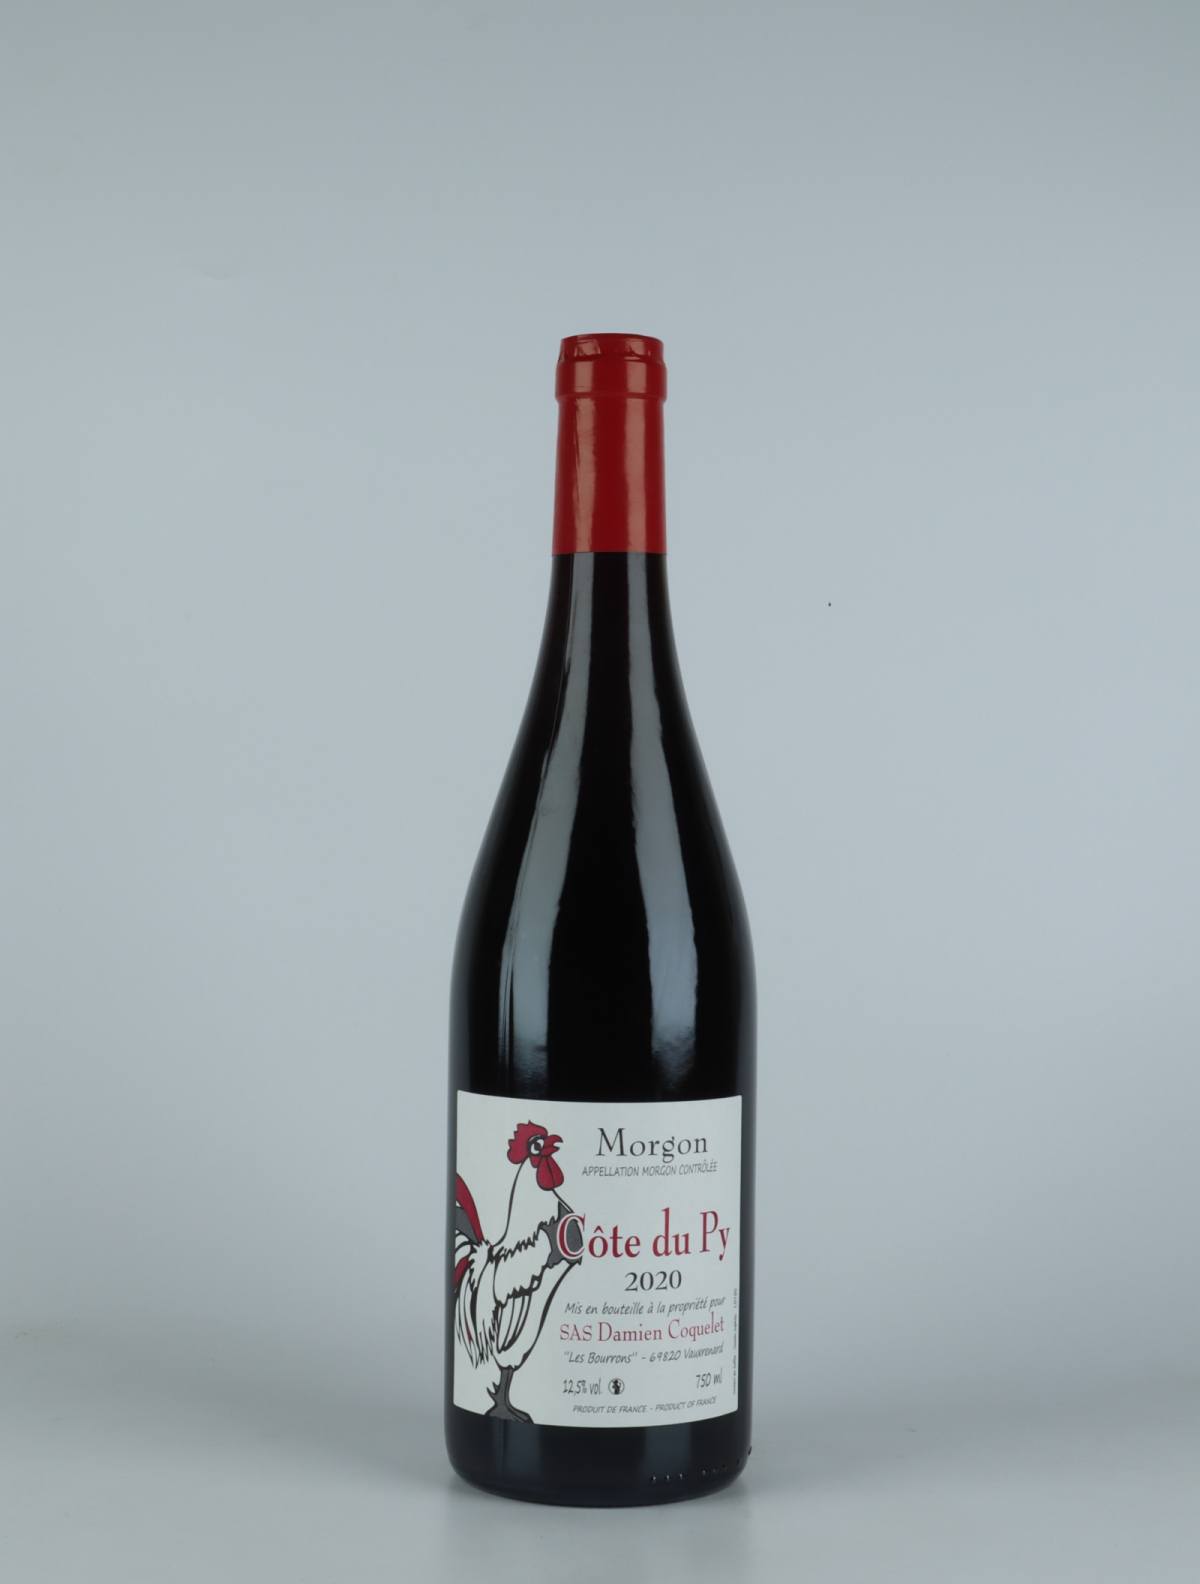 A bottle 2020 Morgon - Côte du Py Red wine from , Beaujolais in France